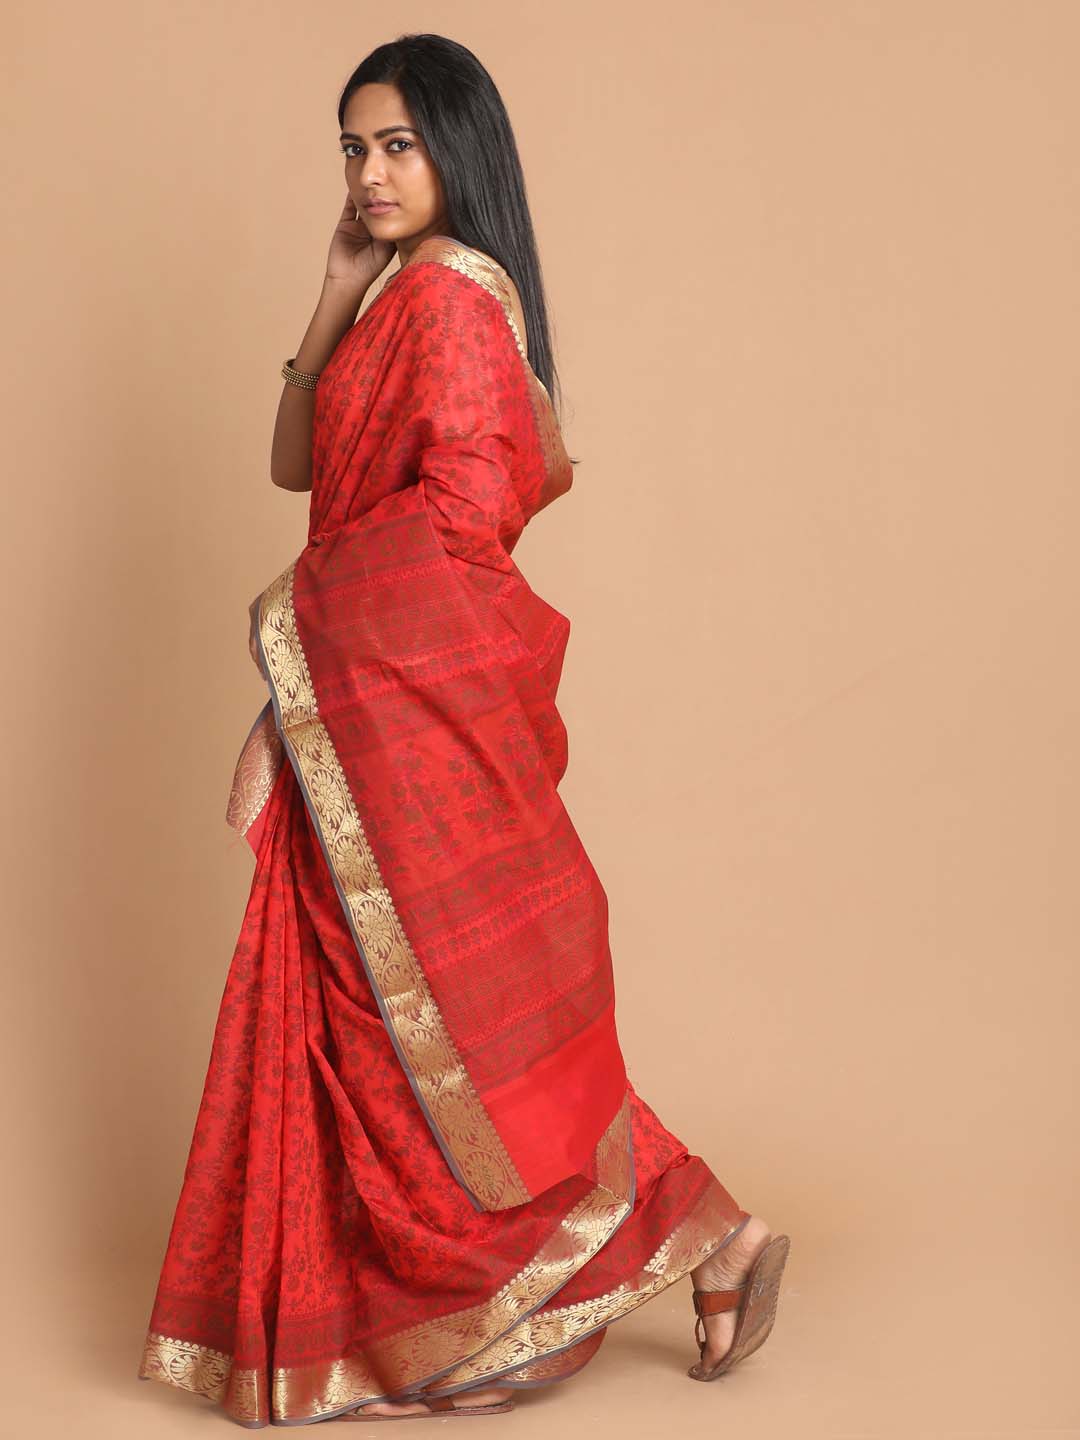 Indethnic Printed Cotton Blend Saree in Red - View 2